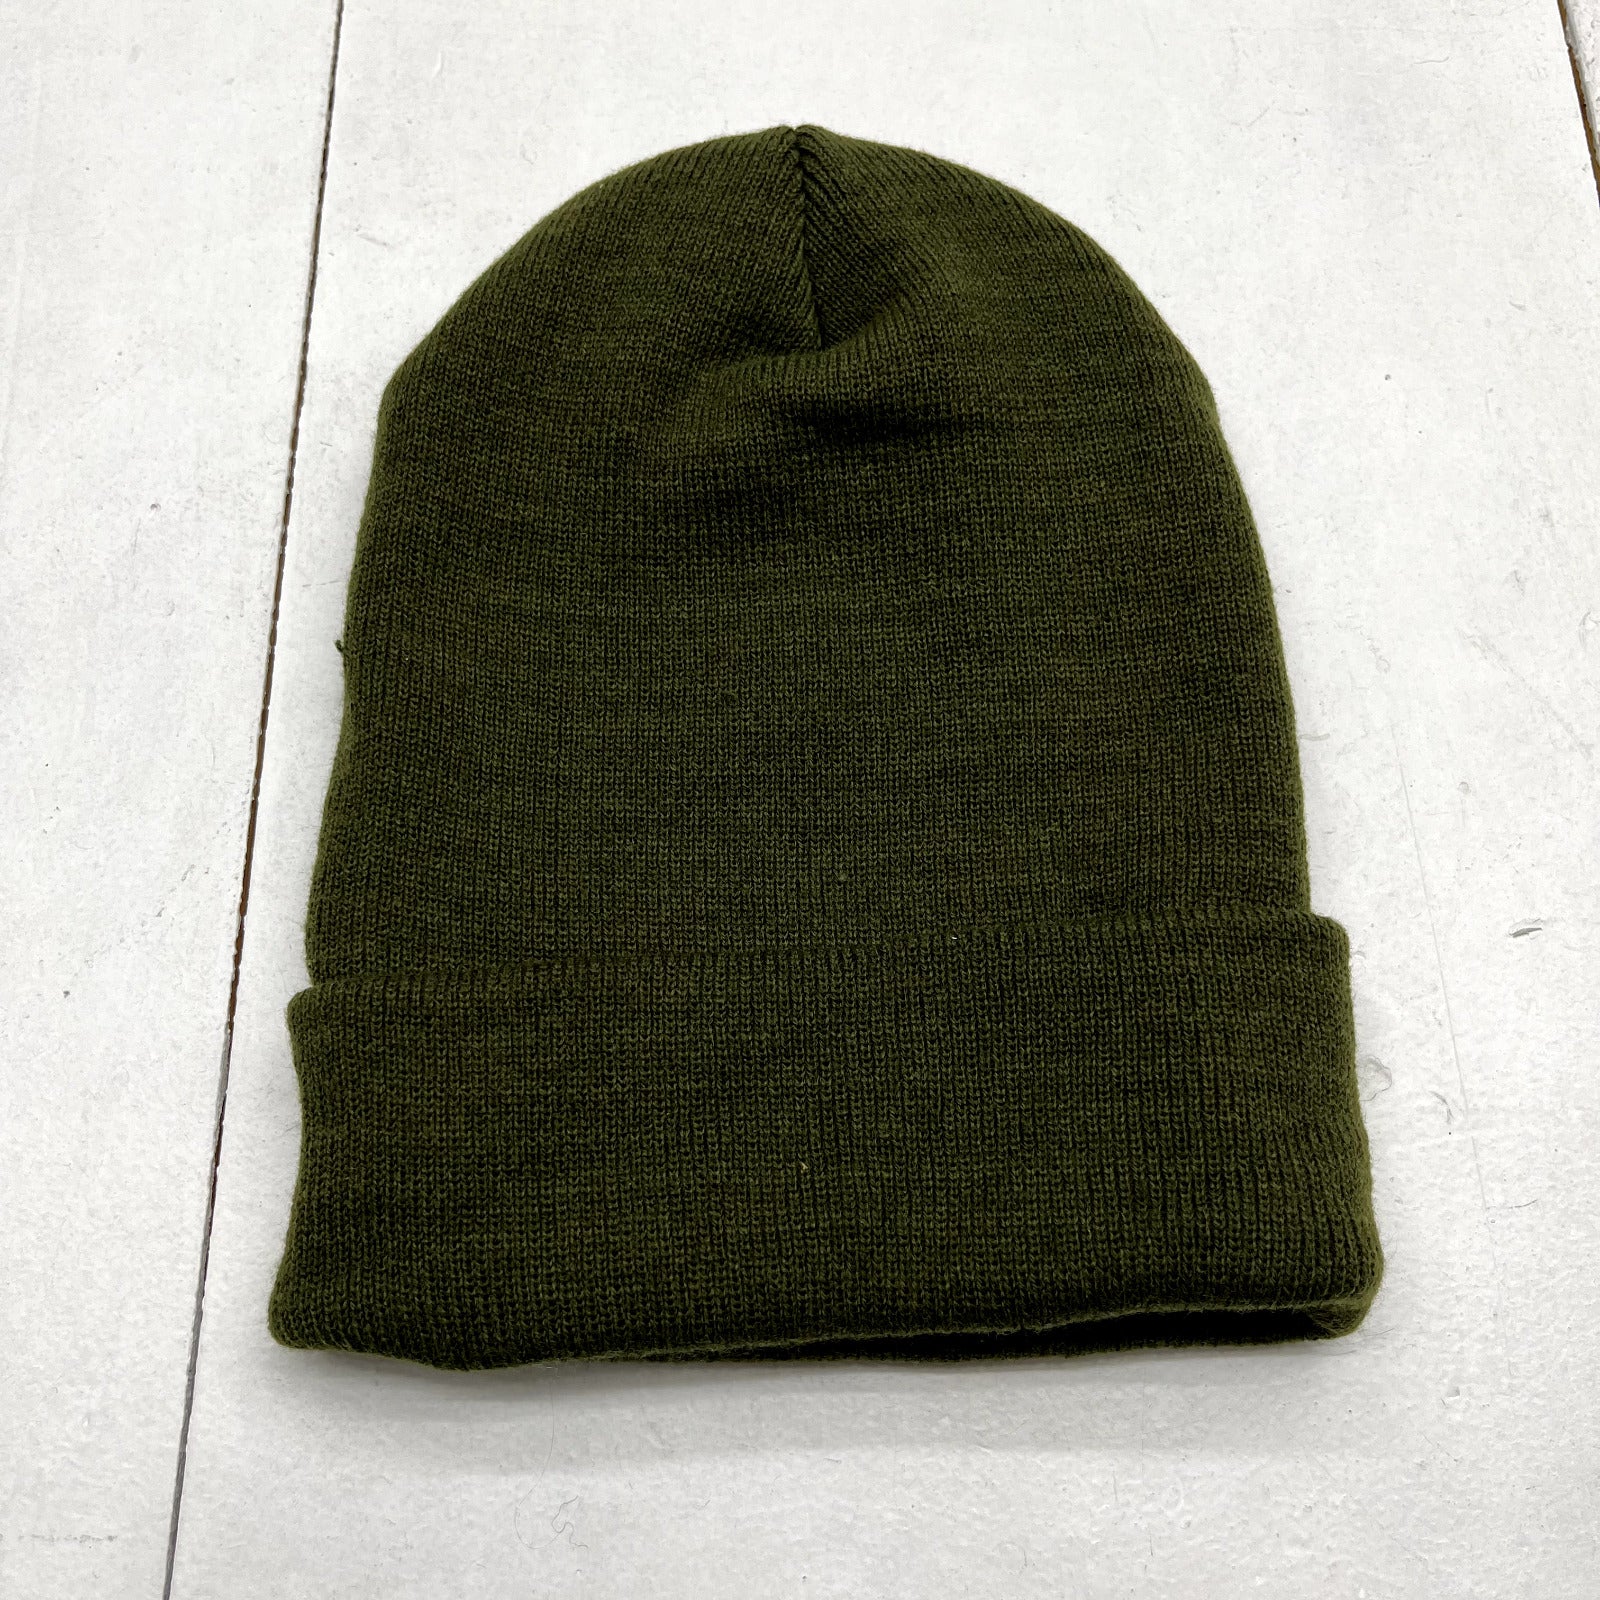 YP Classics Army Green Basic Beanie Unisex Adult One Size